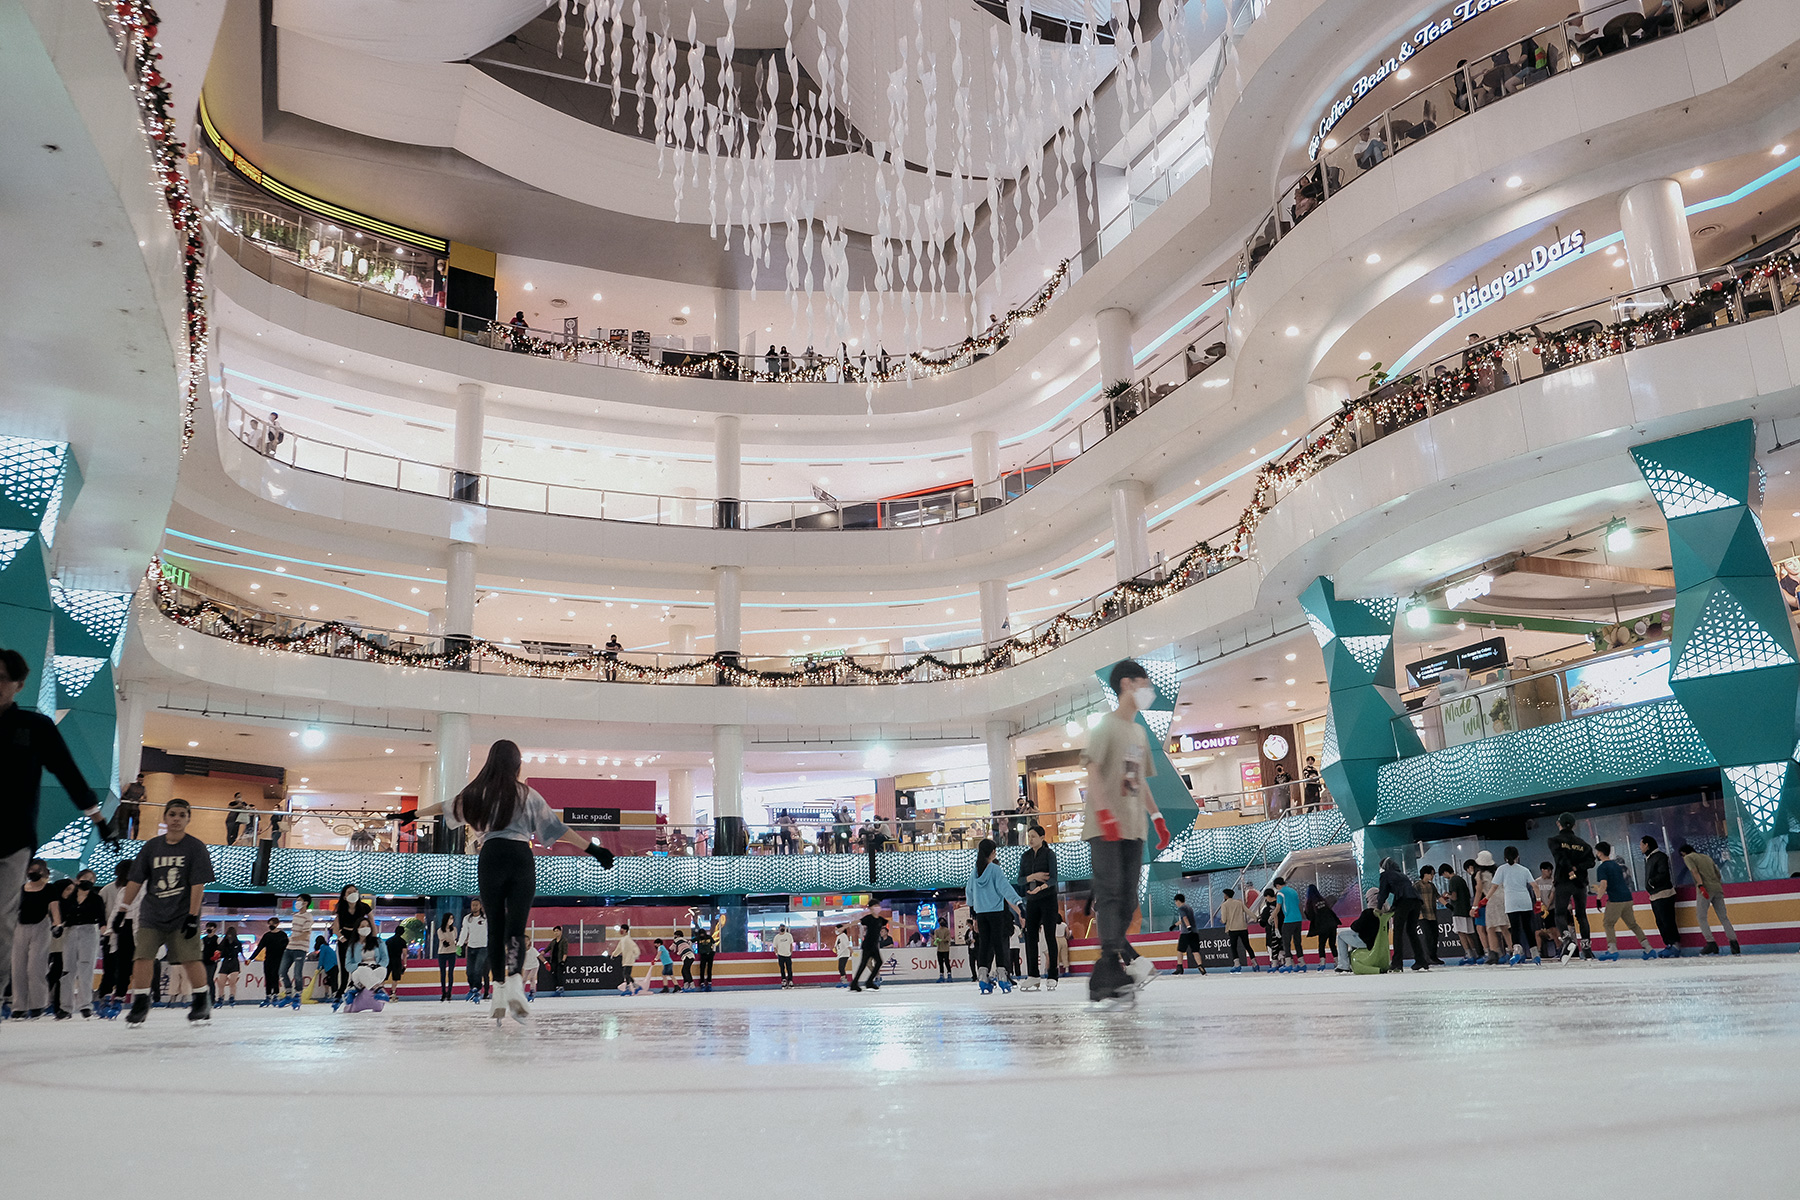 Want a convenient leg work out? Try out indoor ice-skating with your friends at Sunway Pyramid Ice!